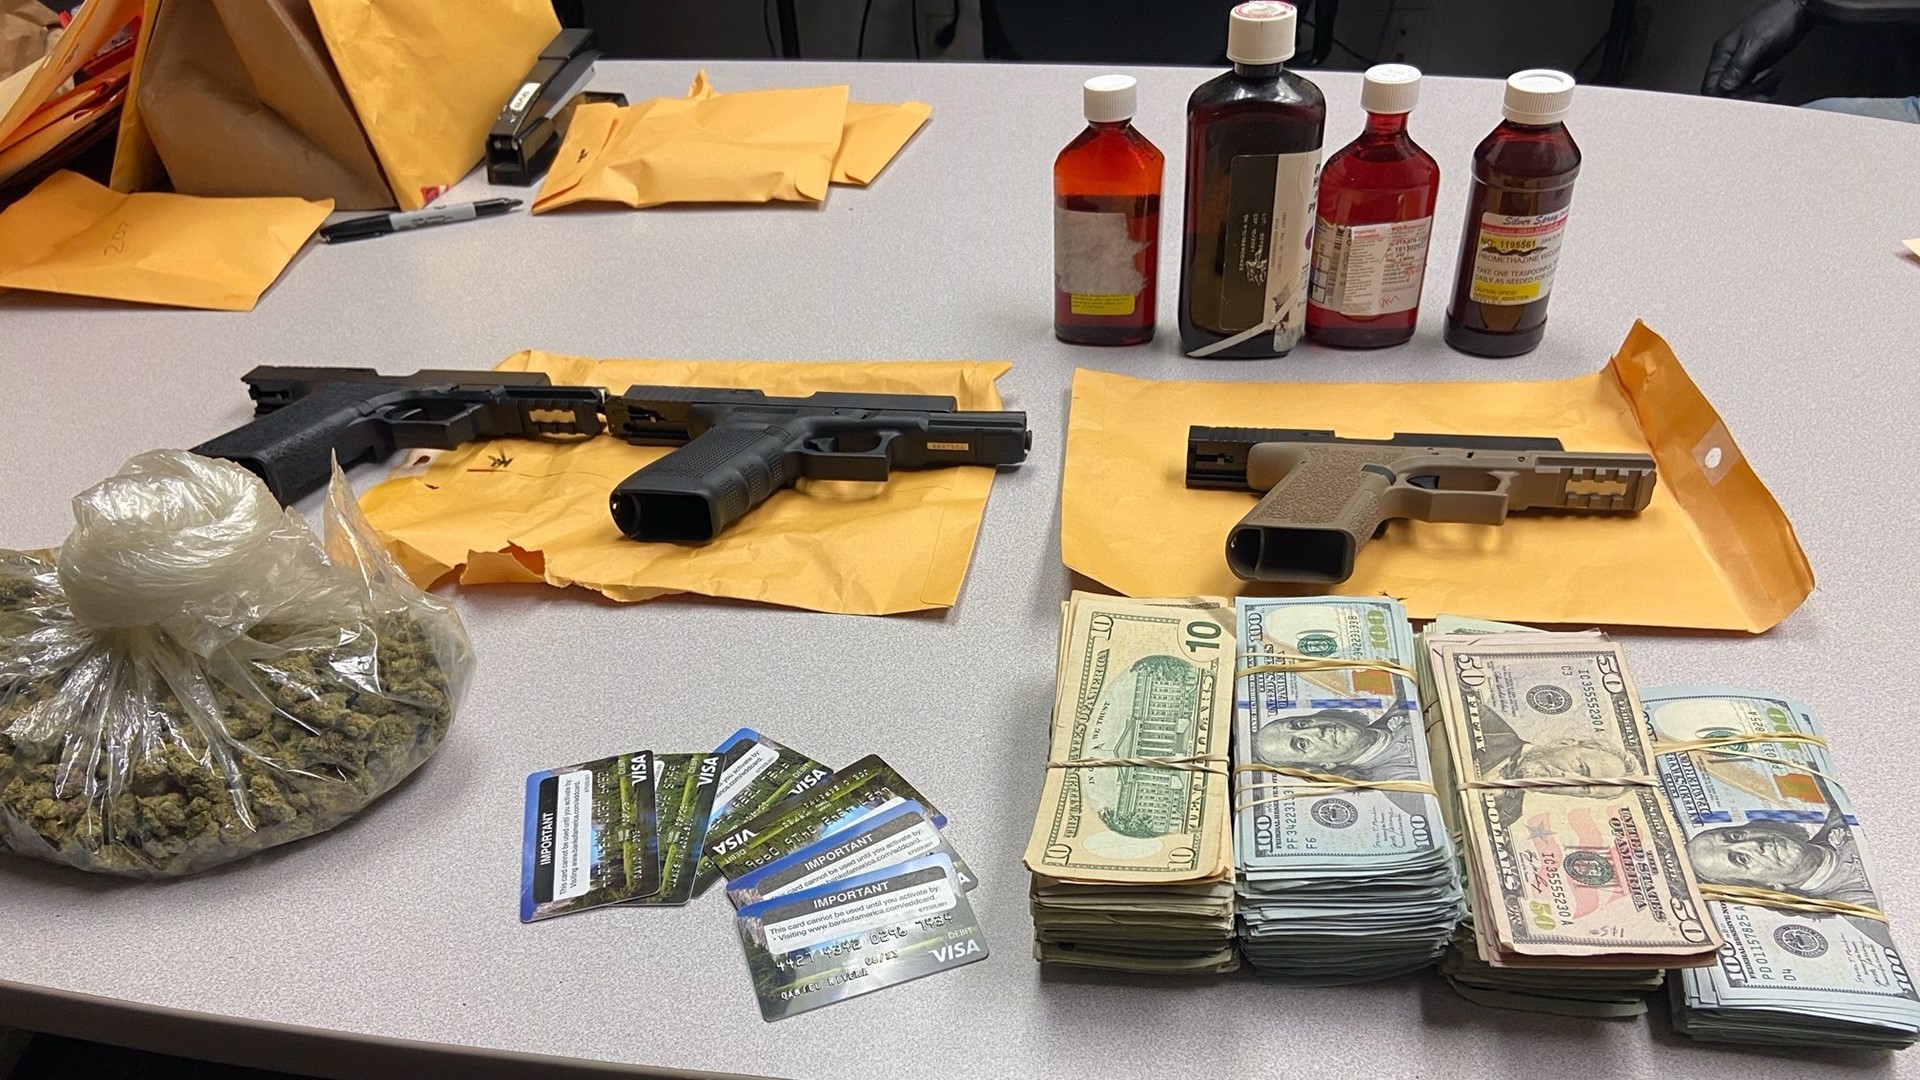 Torrance Police said officers recovered more than 130 EDD cards loaded with over $150,000 and four handguns, two of which did not have serial numbers.